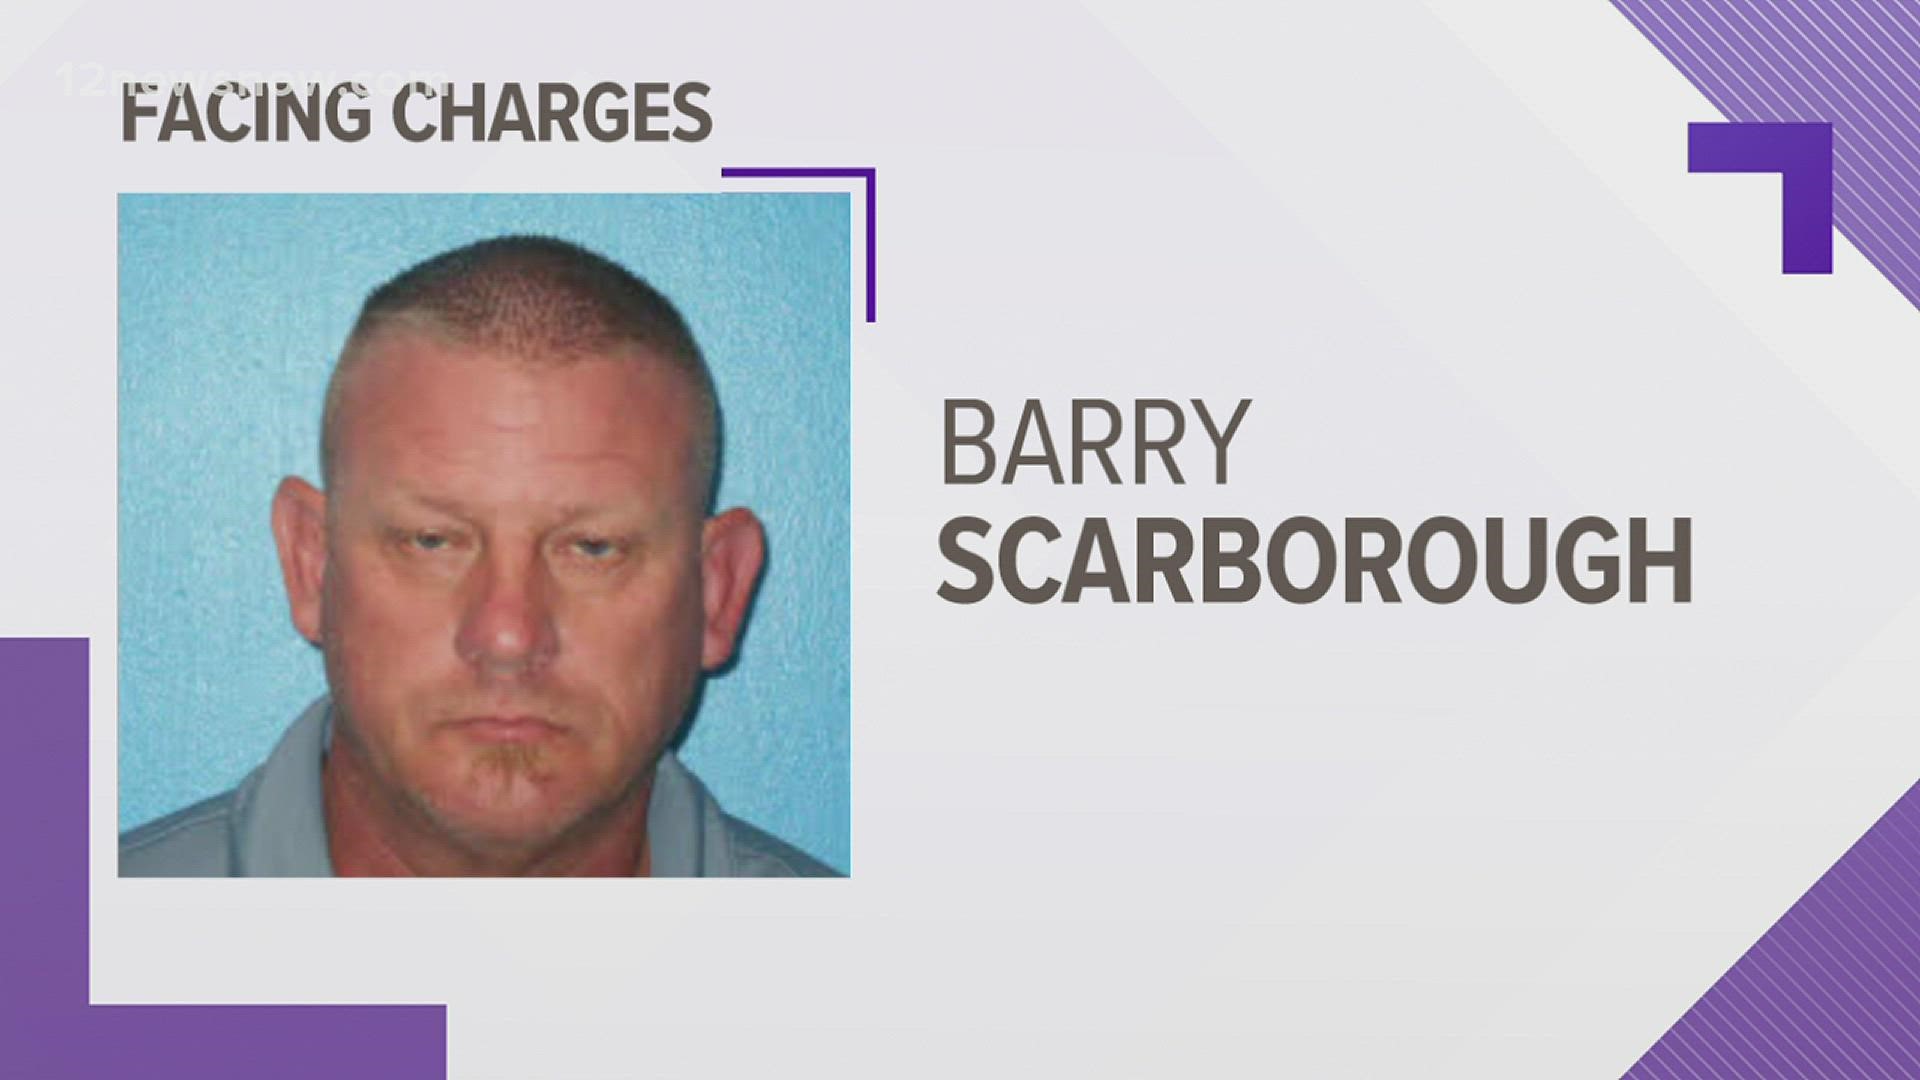 Barry Craig Scarborough, 56 of Lumberton, turned himself into the Hardin County Sheriff’s Office Tuesday, August 24.